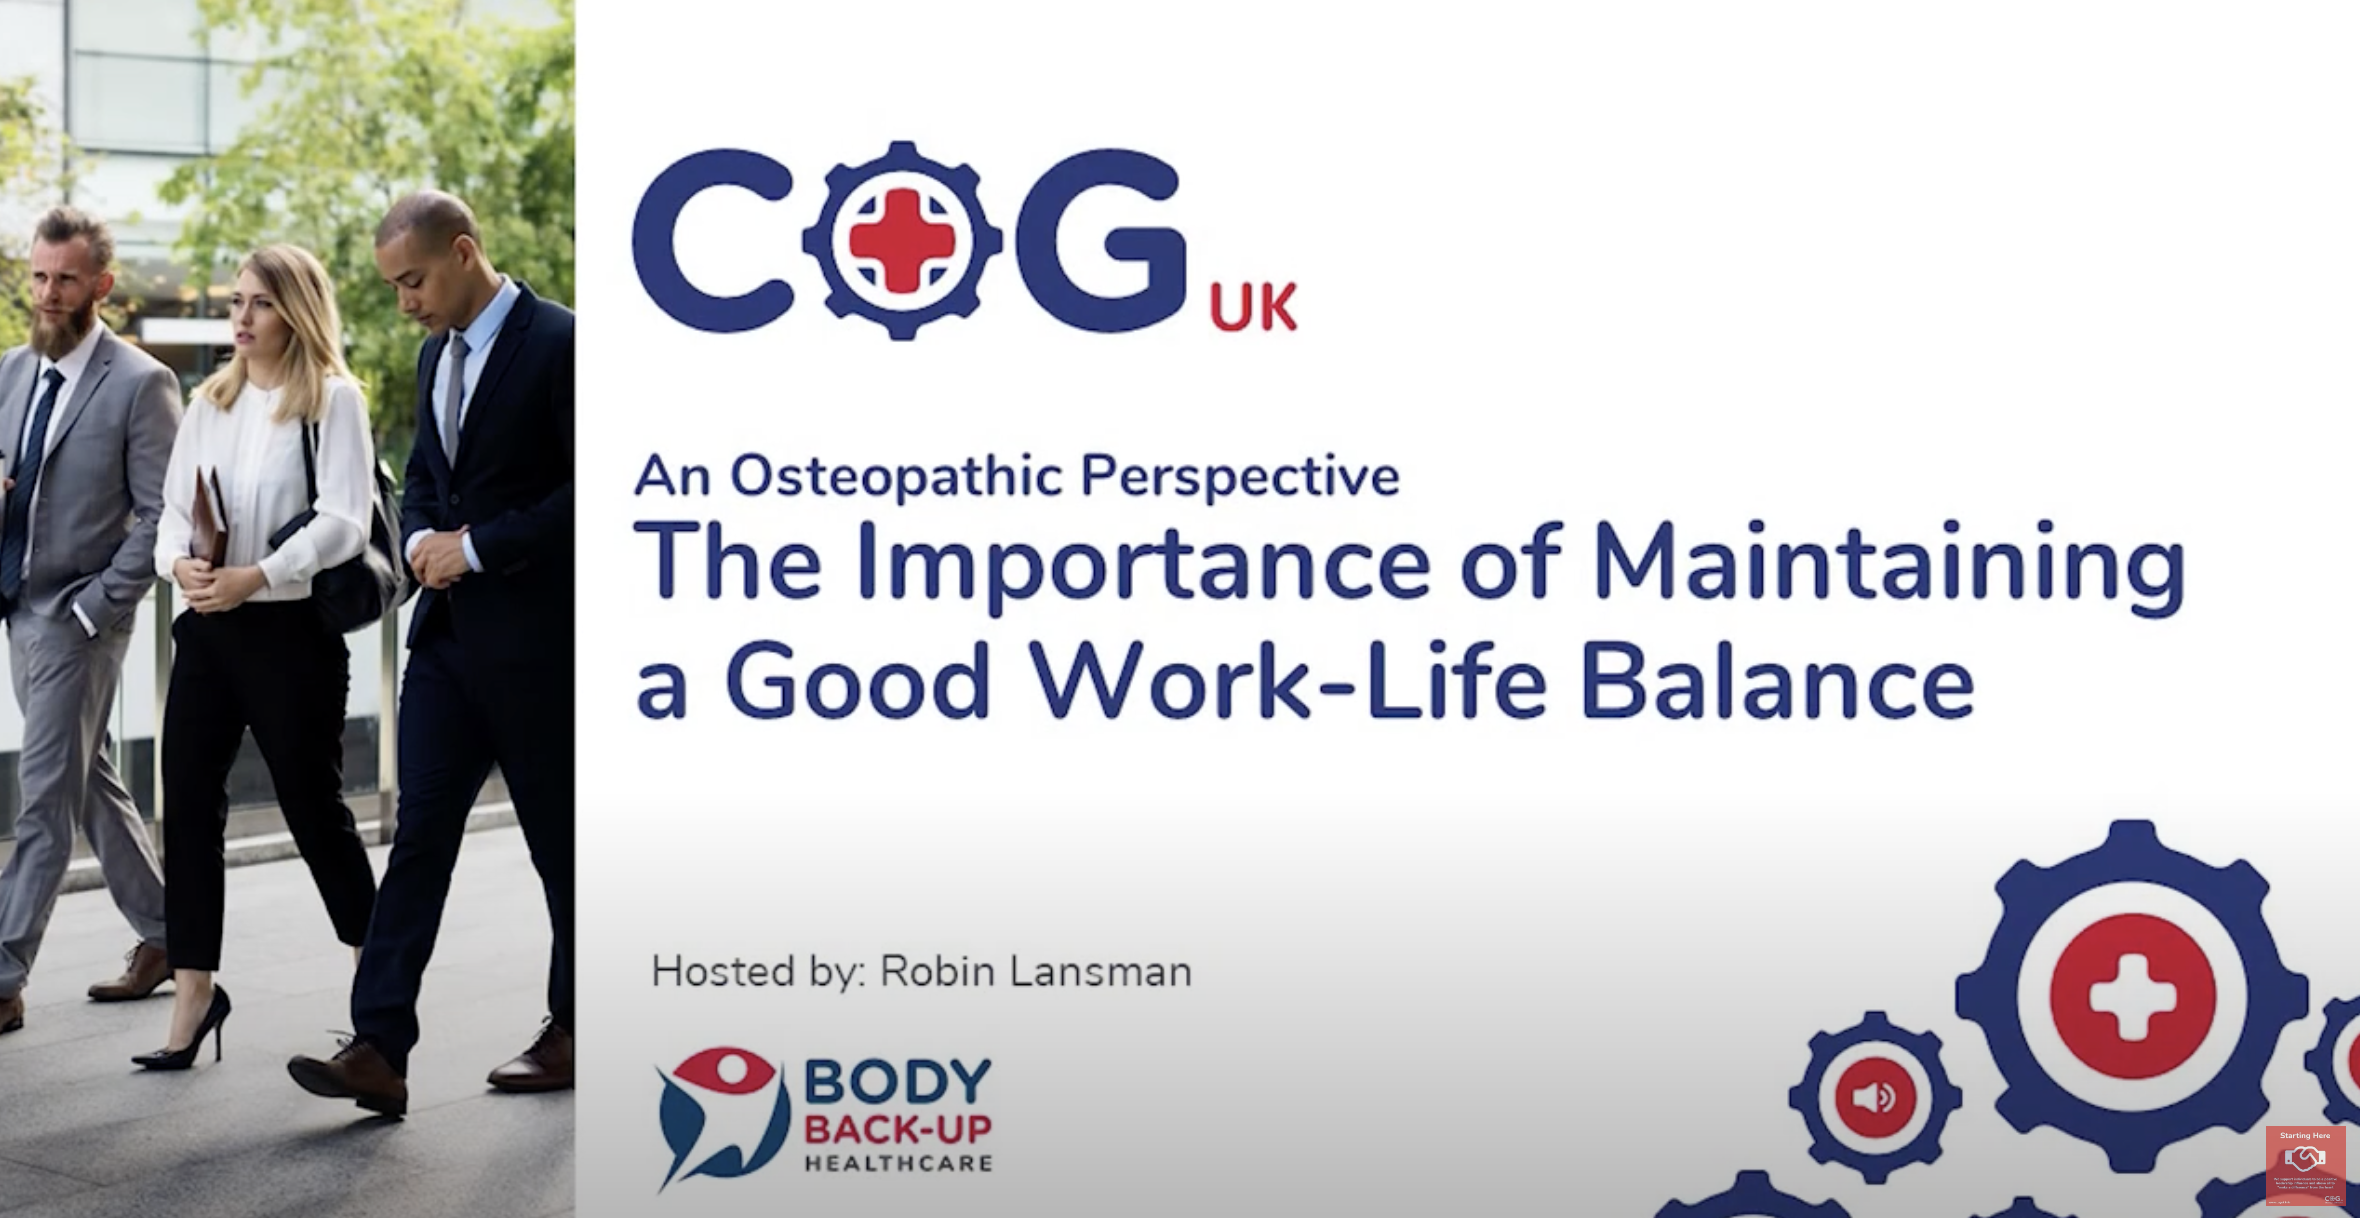 How Important Is A Good Work Balance For Better Mental And Physical Health And Well-being?